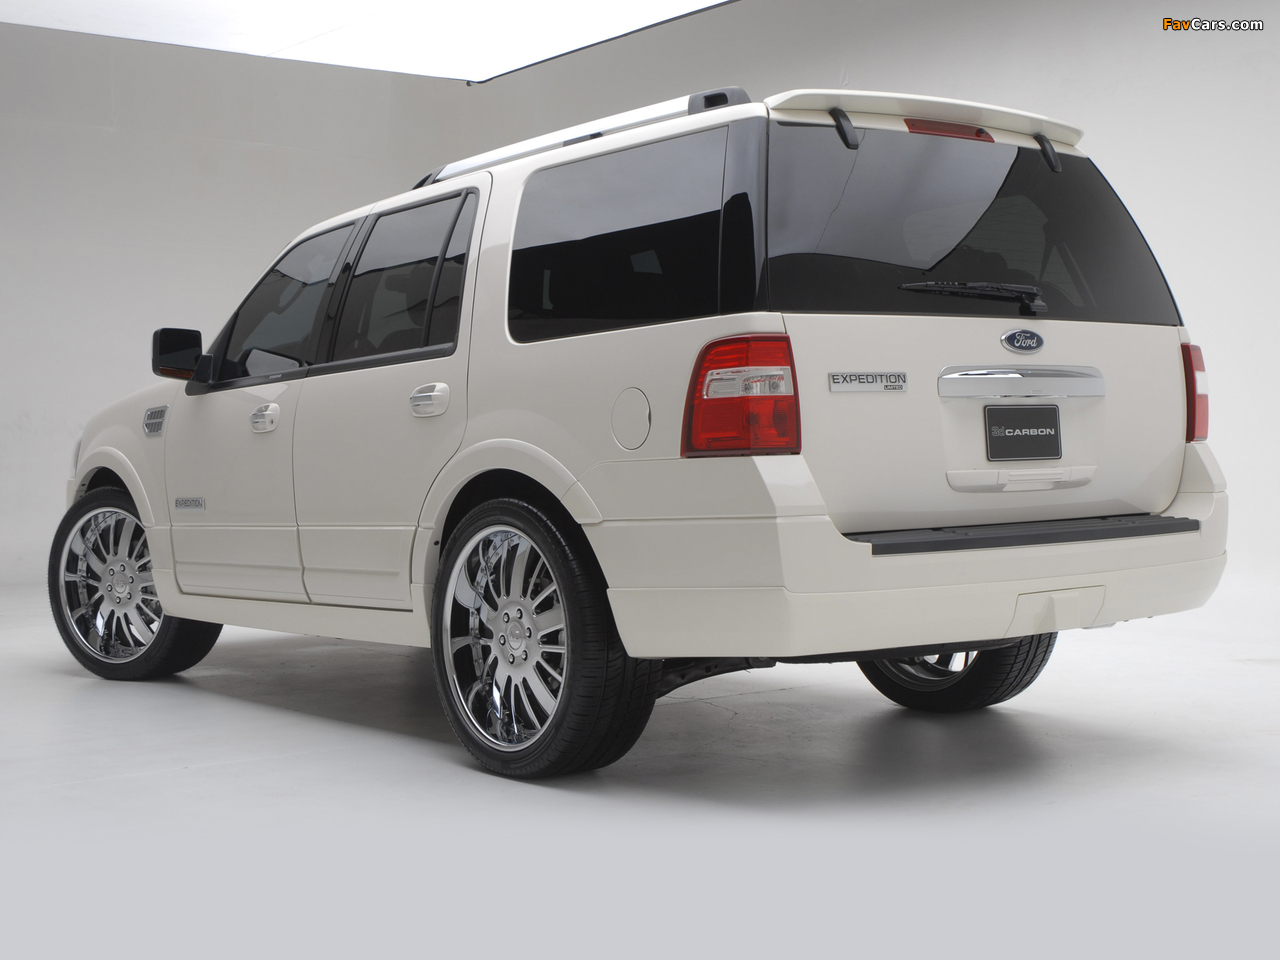 Ford Expedition Urban Rider Styling Kit by 3dCarbon 2007 images (1280 x 960)